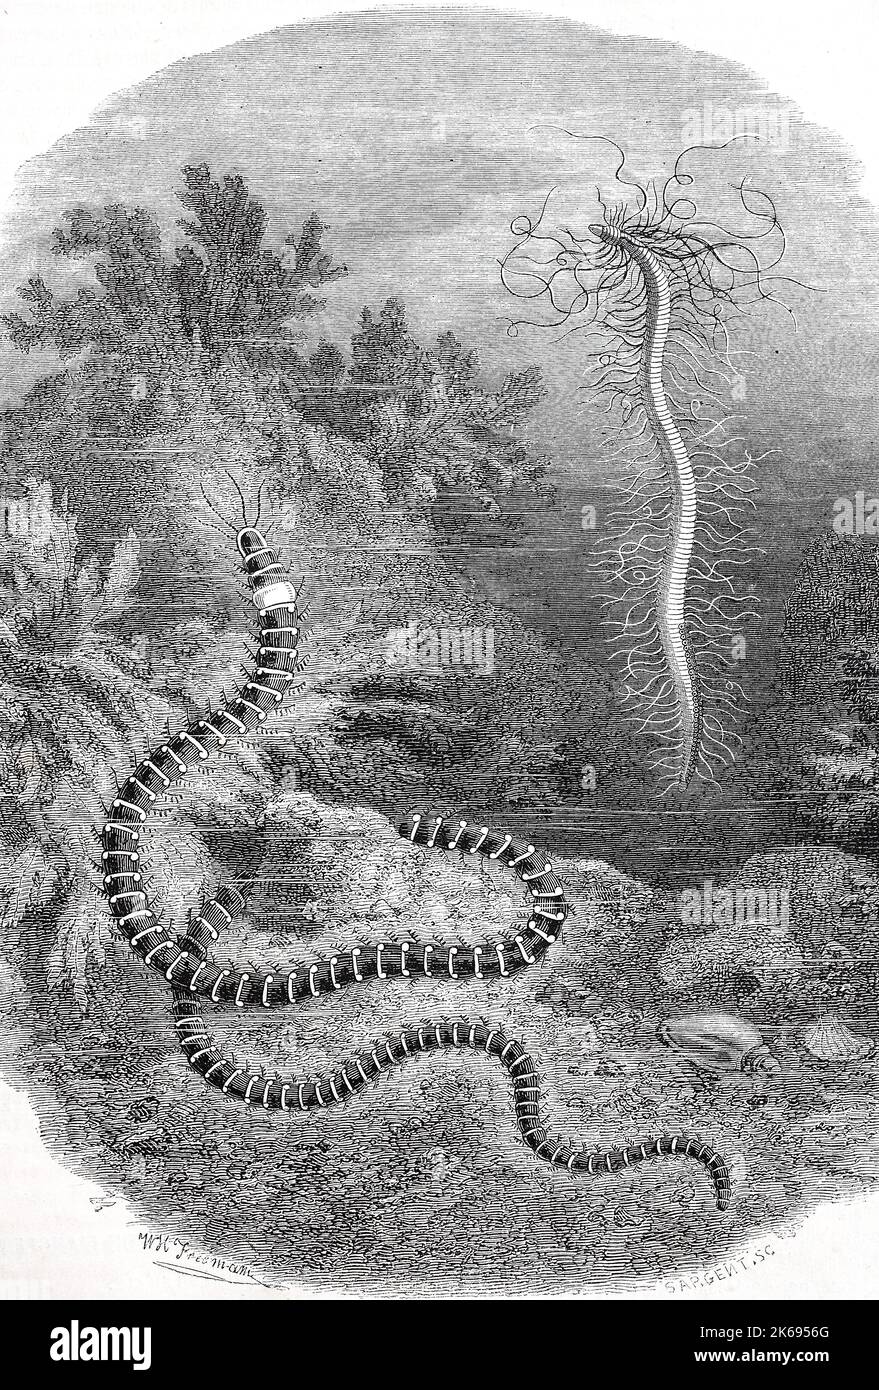 Digital improved reproduction, Cirratulus cirratus is a species of marine polycheate worm in the family Cirratulidae, original woodprint from th 19th century Stock Photo